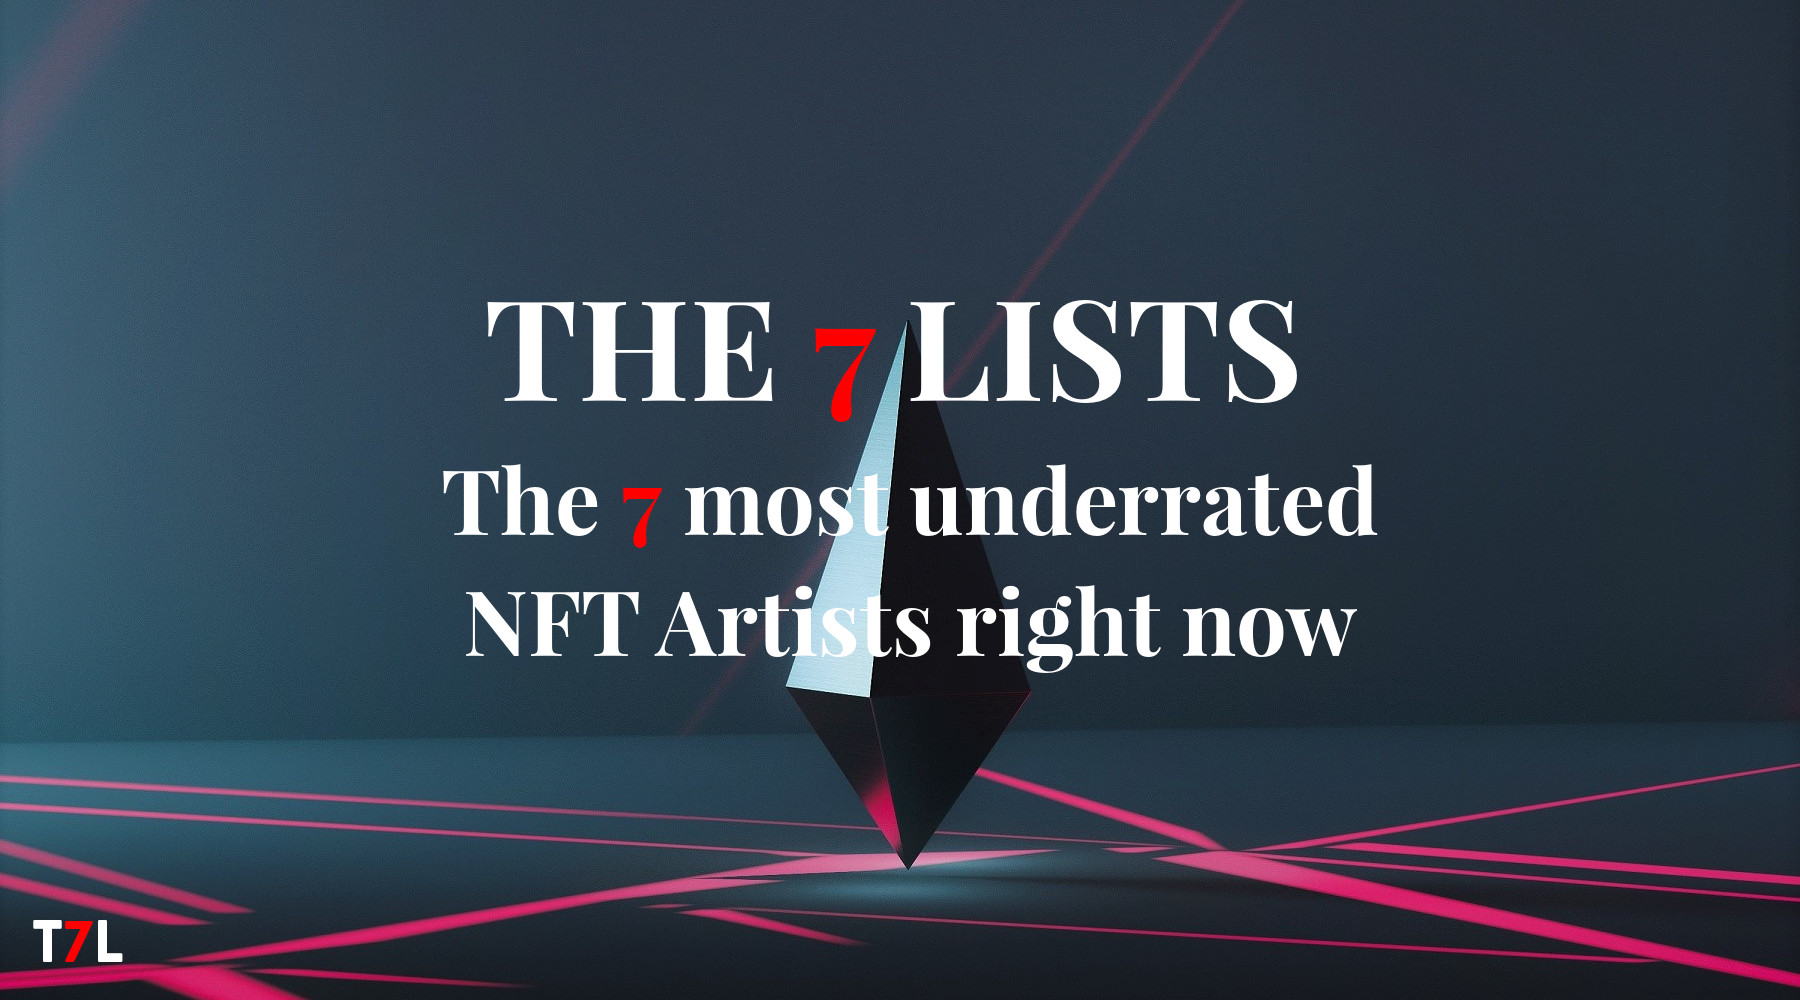 T7L_7 Most Underrated NFT Artists Right Now